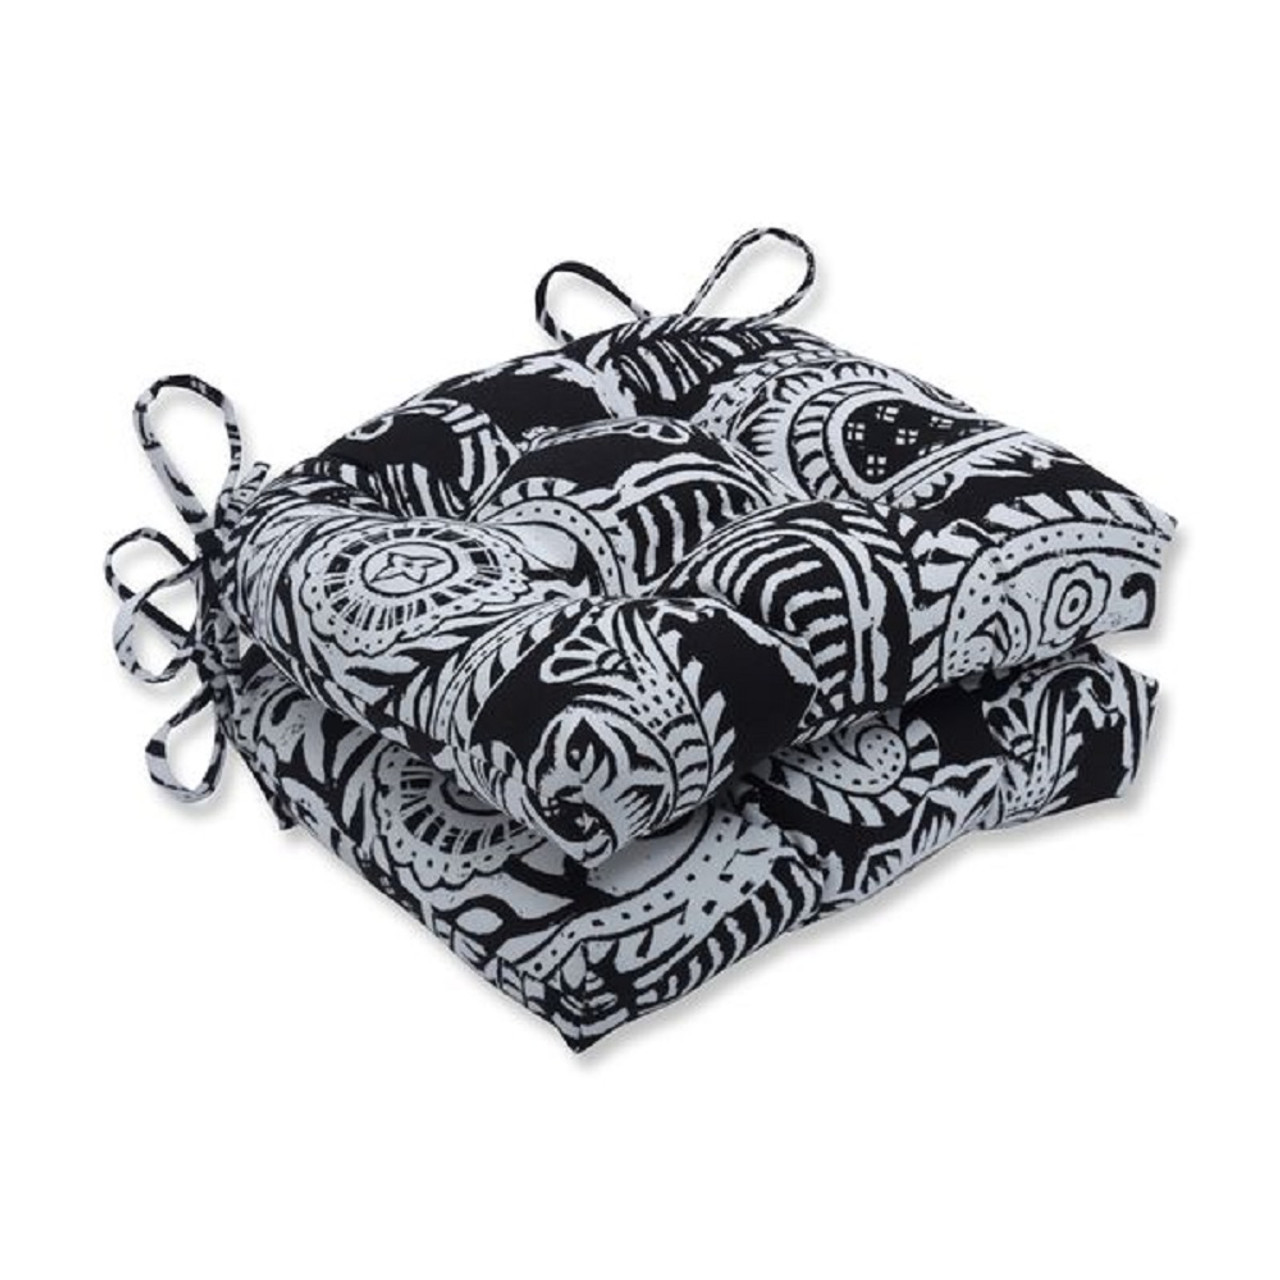 Set Of 2 Black White Paisley Design Reversible Chair Pads Indoor